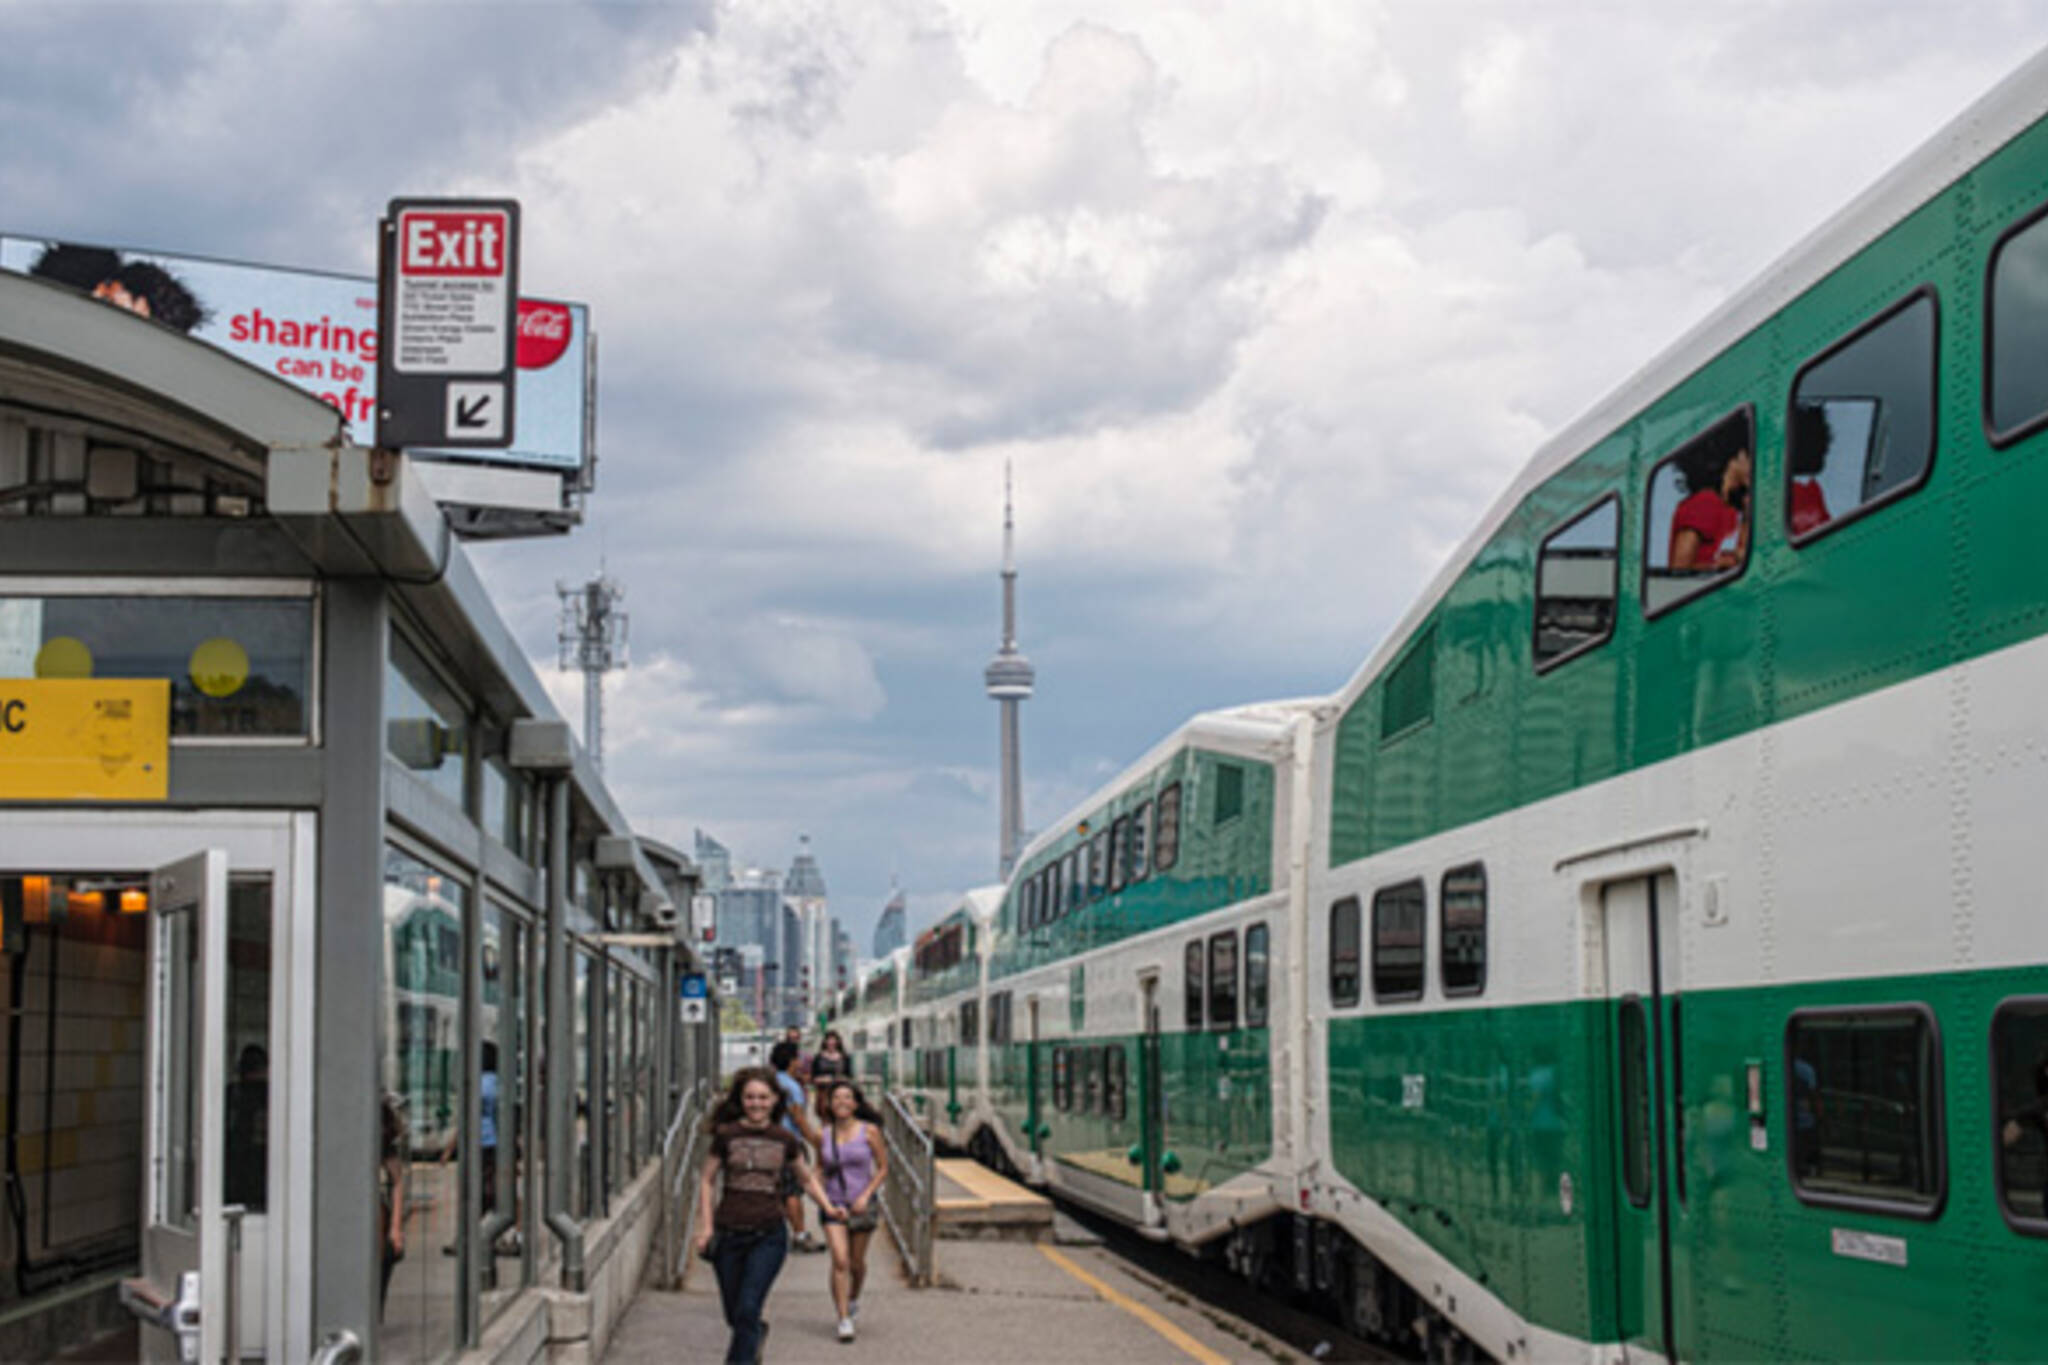 5331 2016722 Go Train ?cmd=resize Then Crop&quality=70&w=2048&height=1365